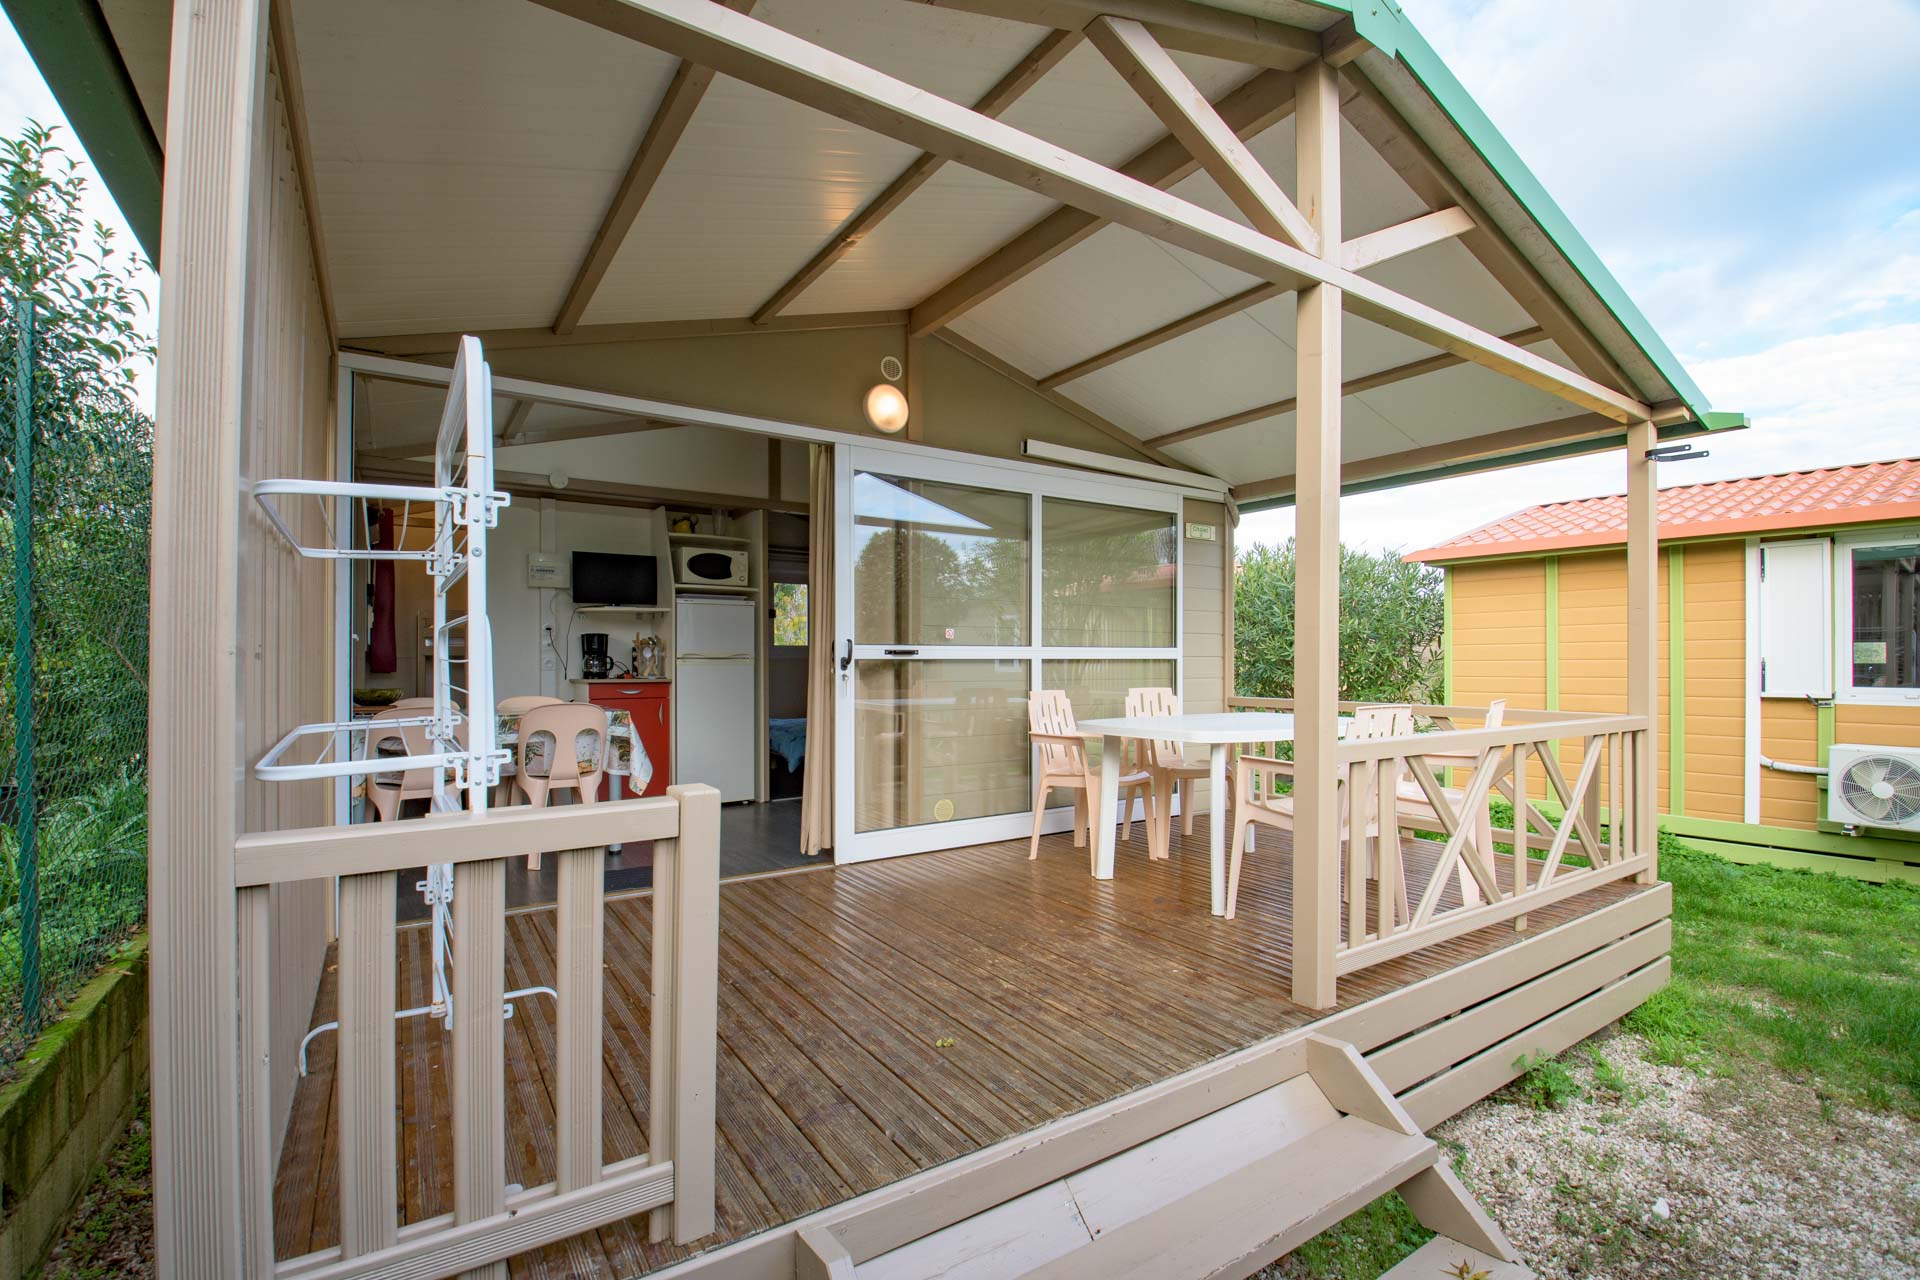 Accommodation - Chalet Nemo 22M² / 2 Bedrooms - Air-Conditioning / Sheltered Terrace - Camping LA VIEILLE FERME